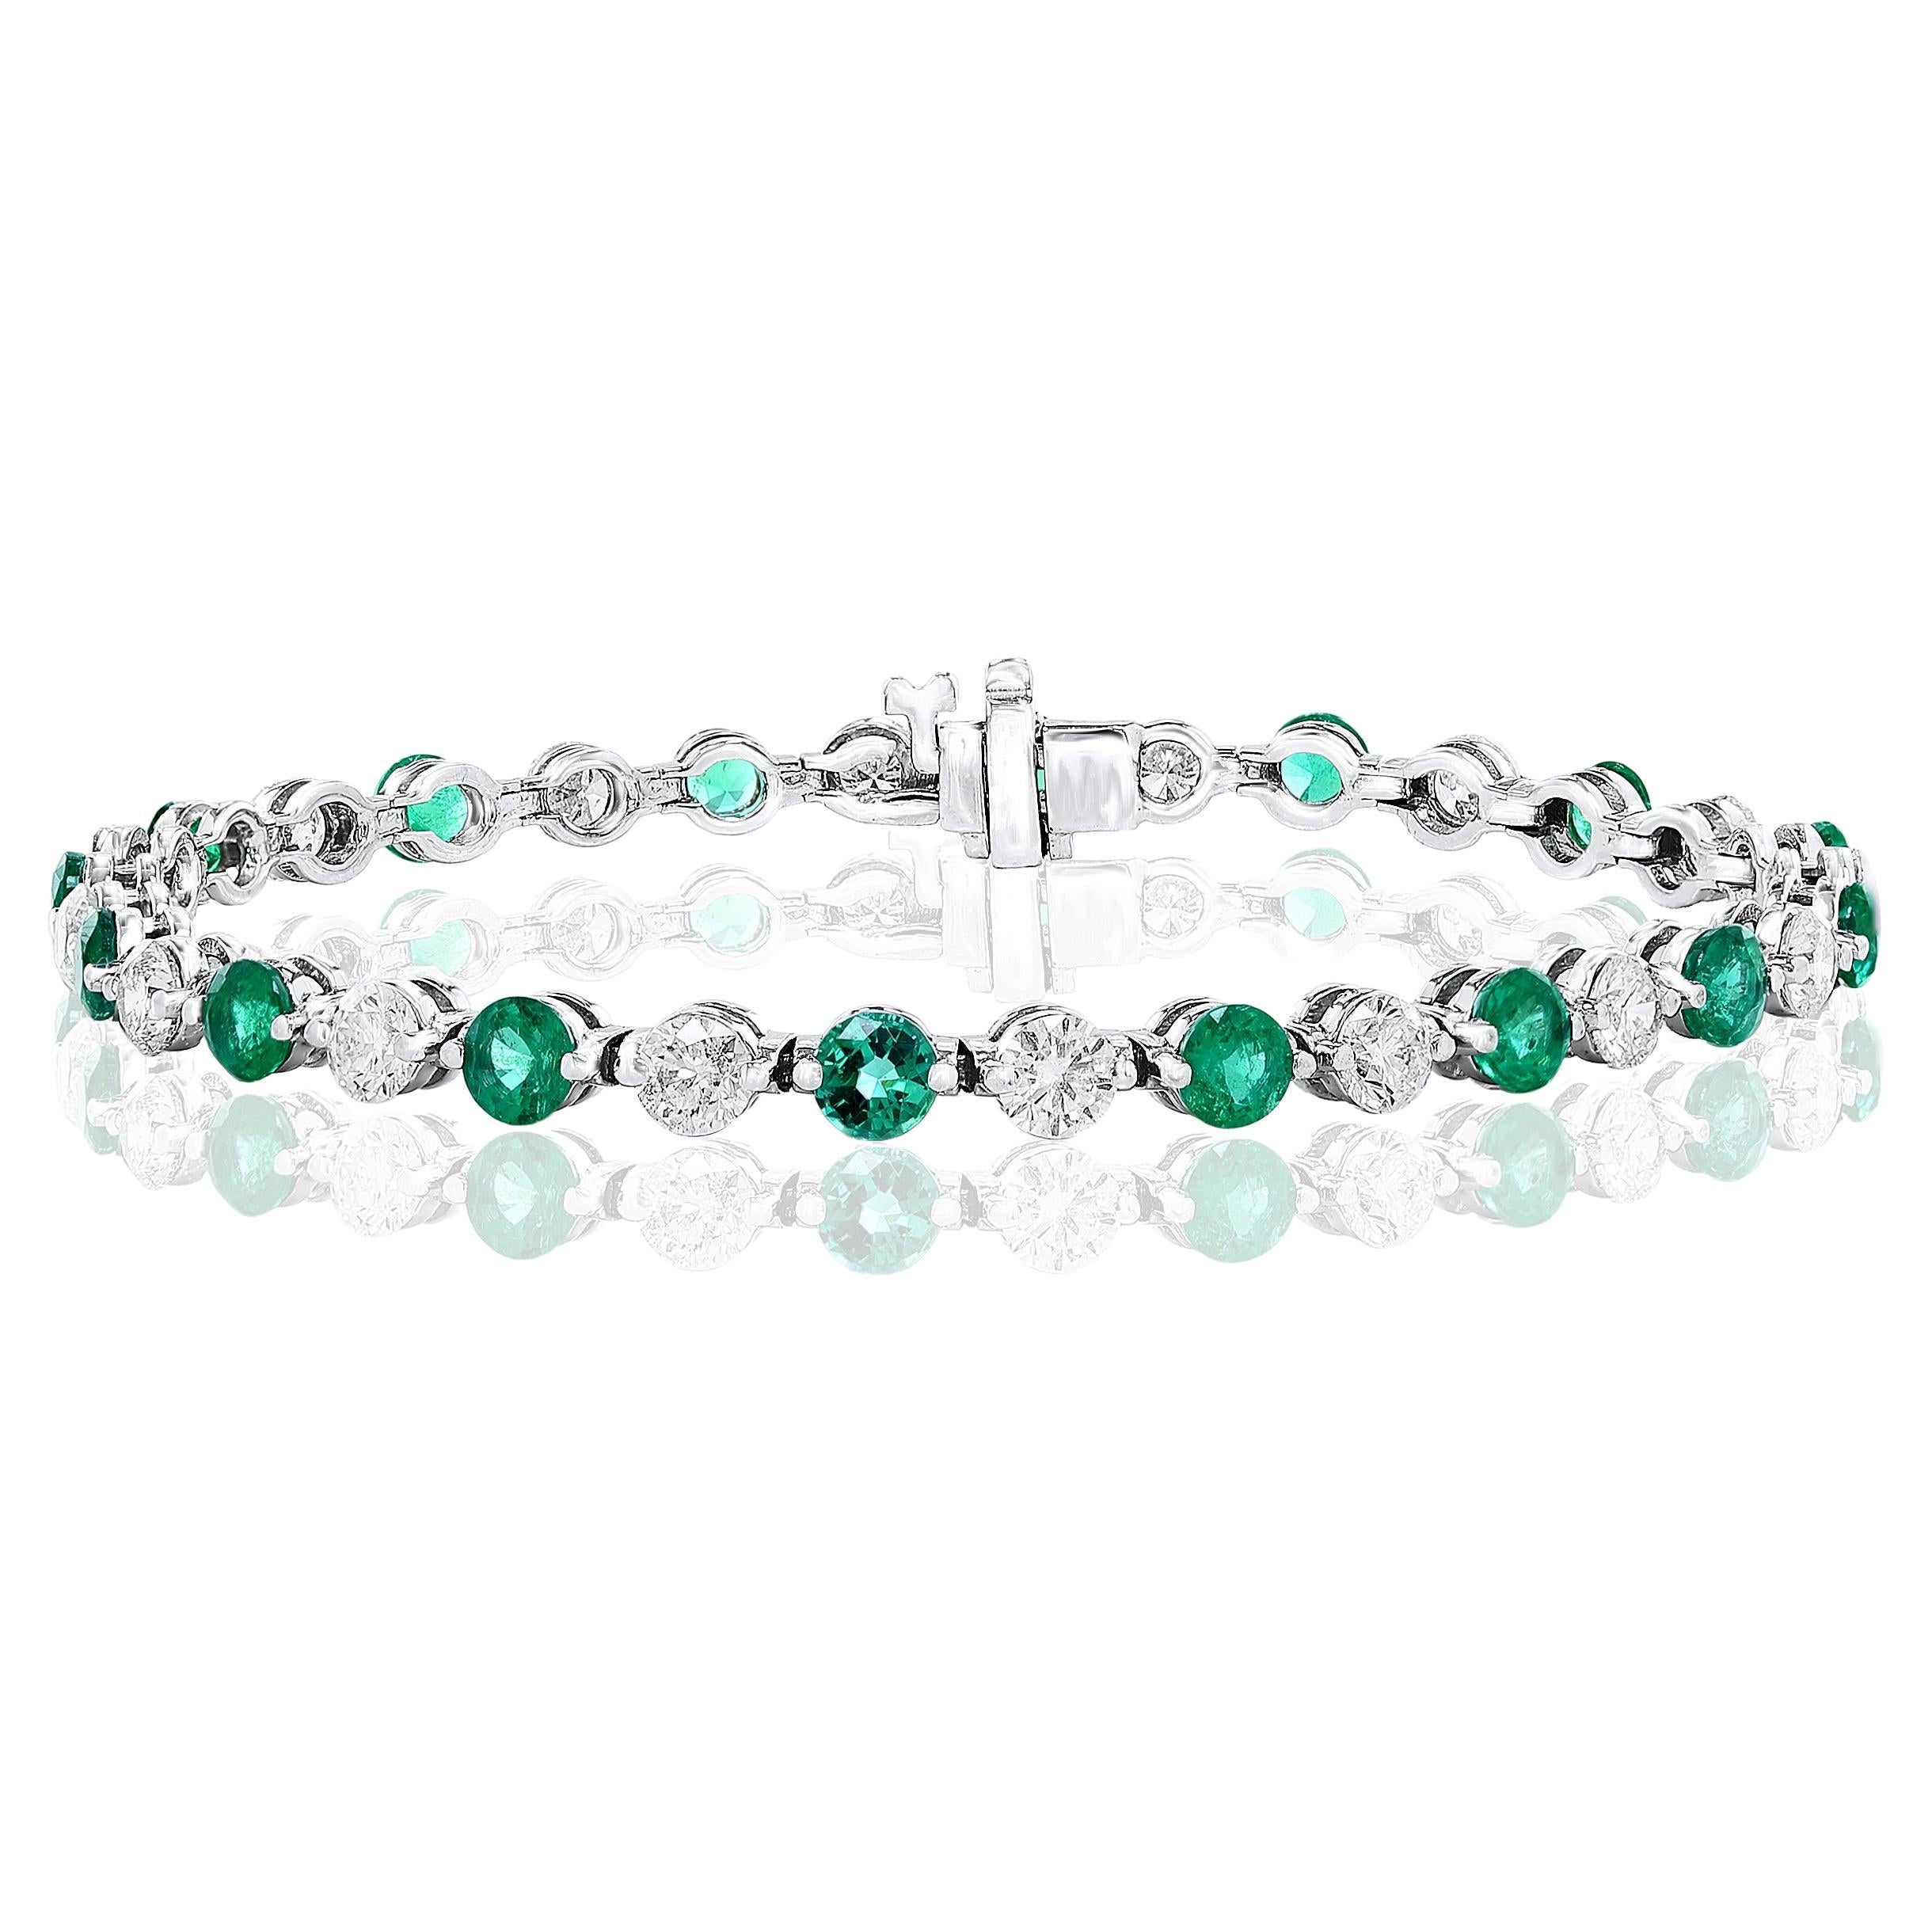 4.07 Carat Round Emerald and Diamond Bracelet in 14K White Gold For Sale